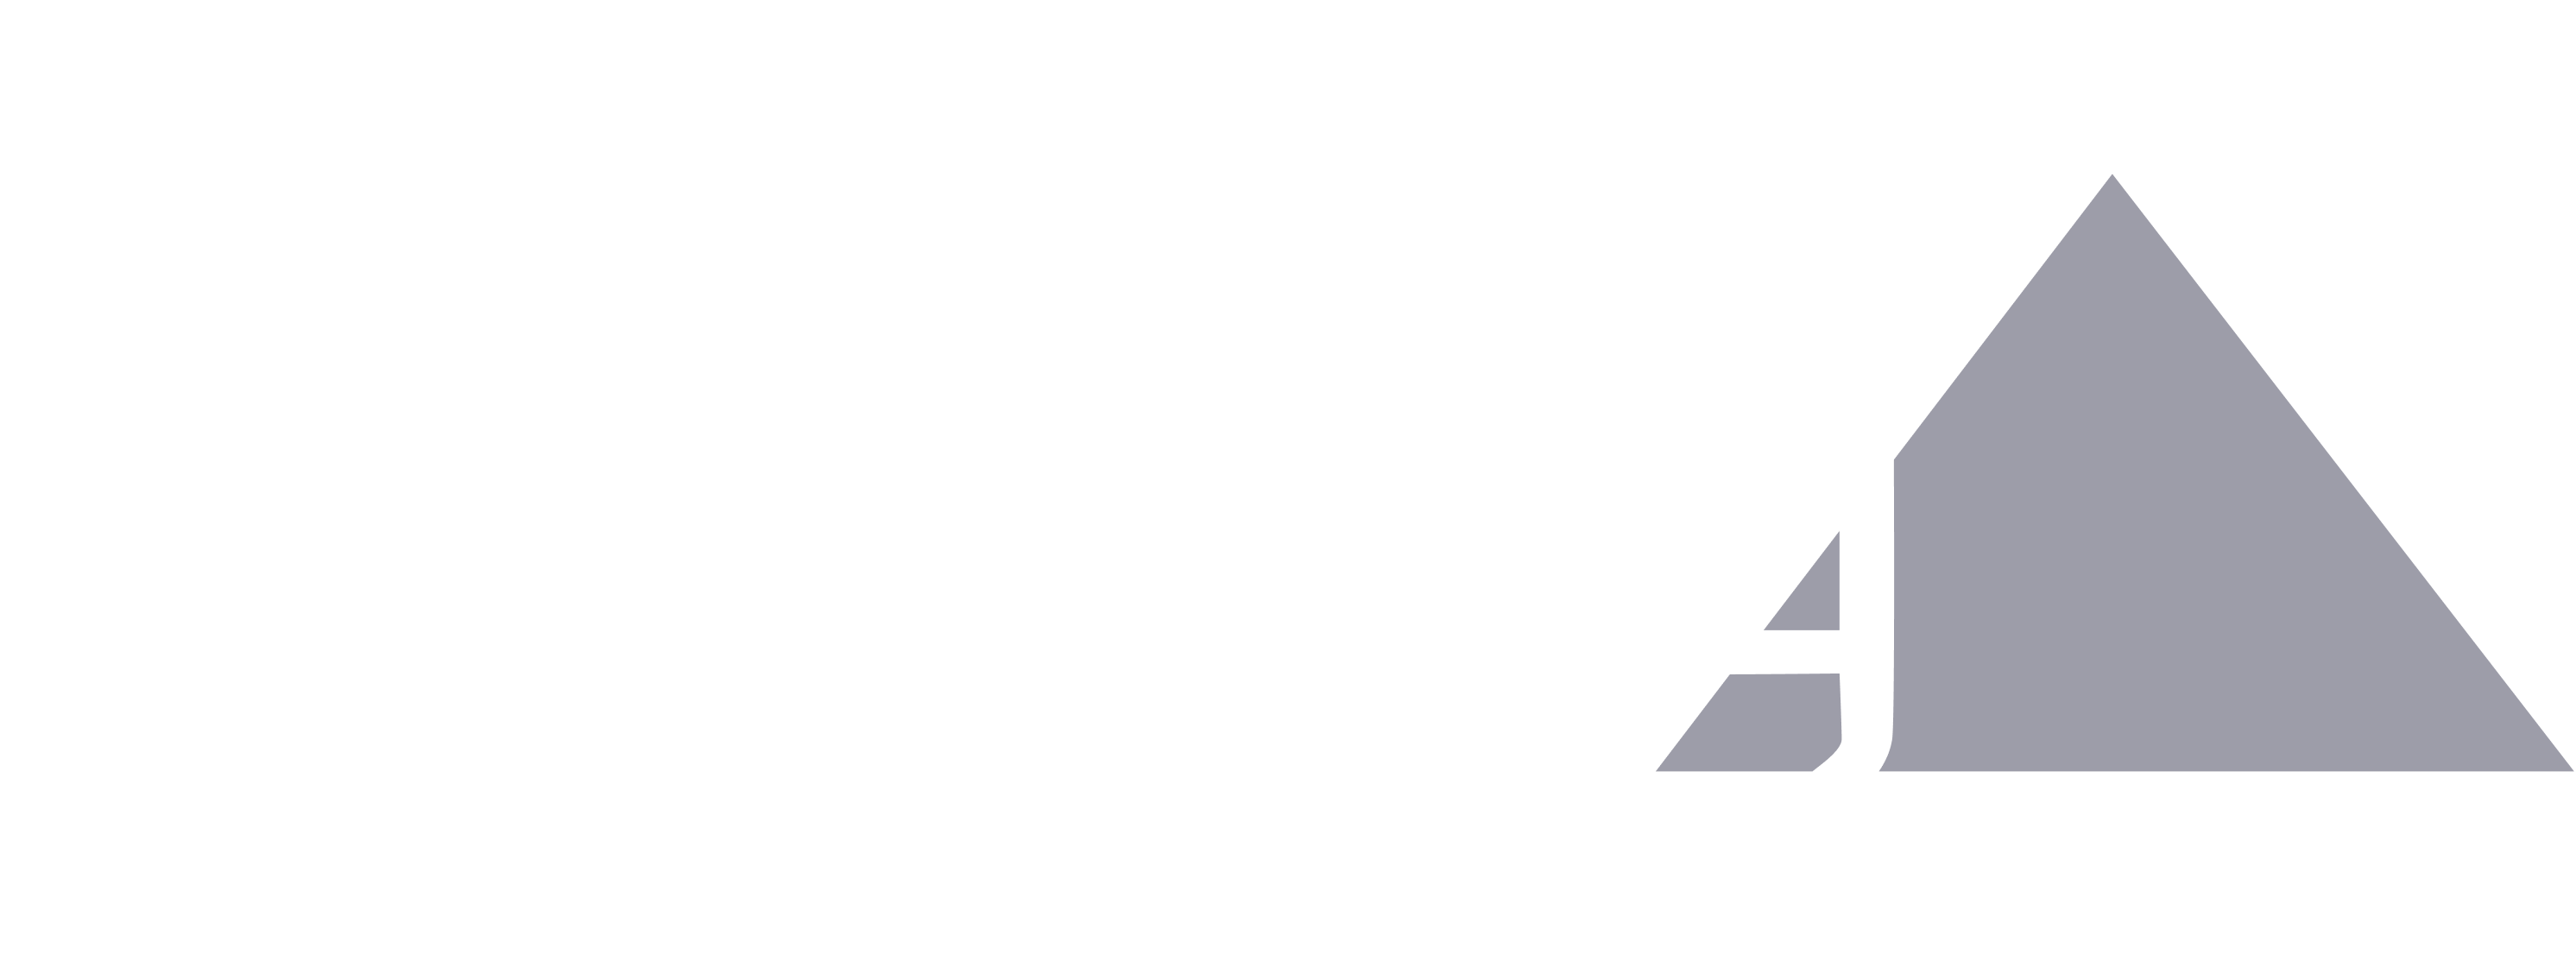 logo-bray-solutions-white.png